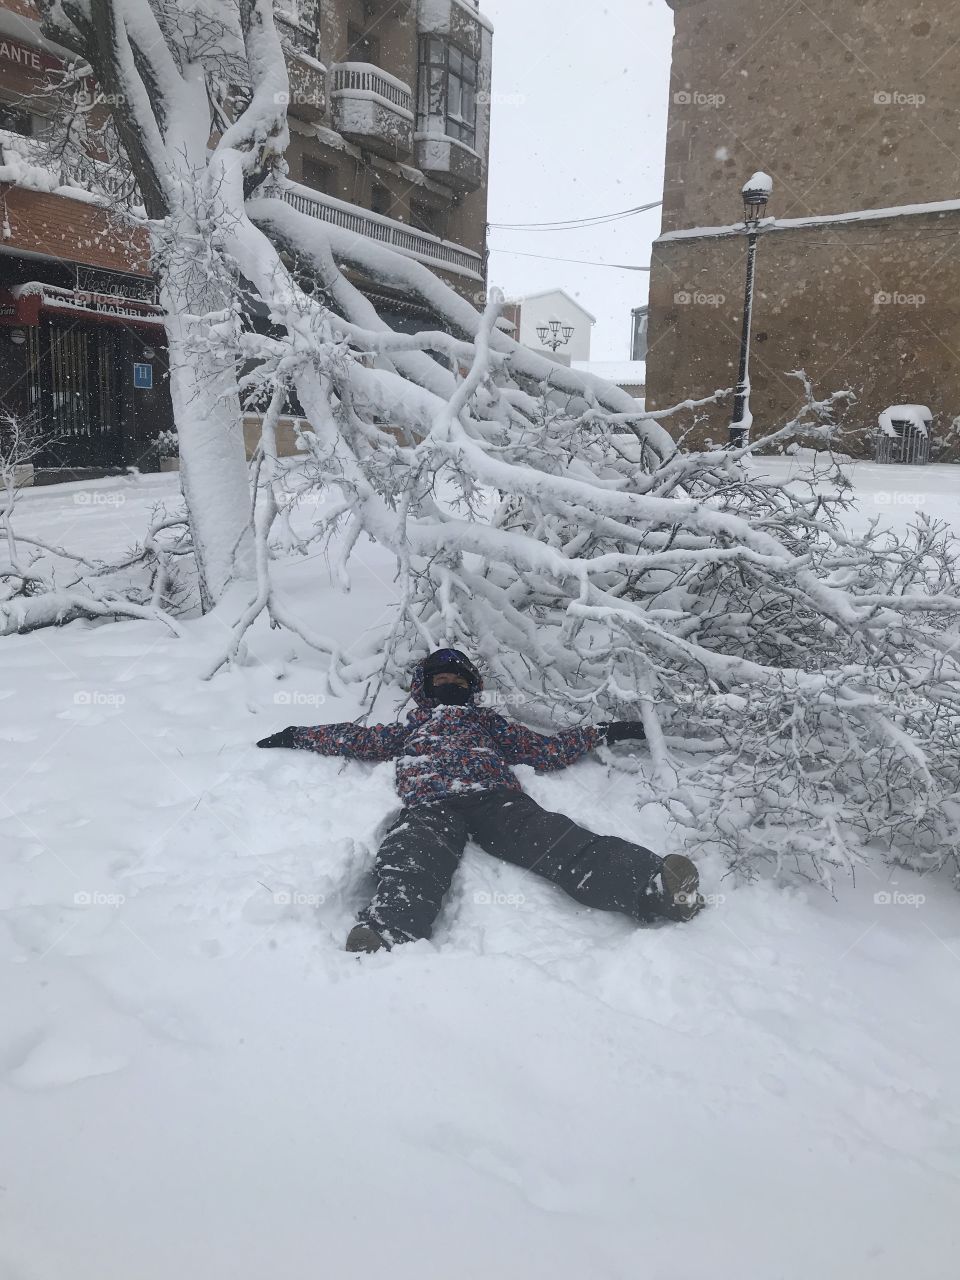 Stay safe and be aware of the tree while it’s snowing.